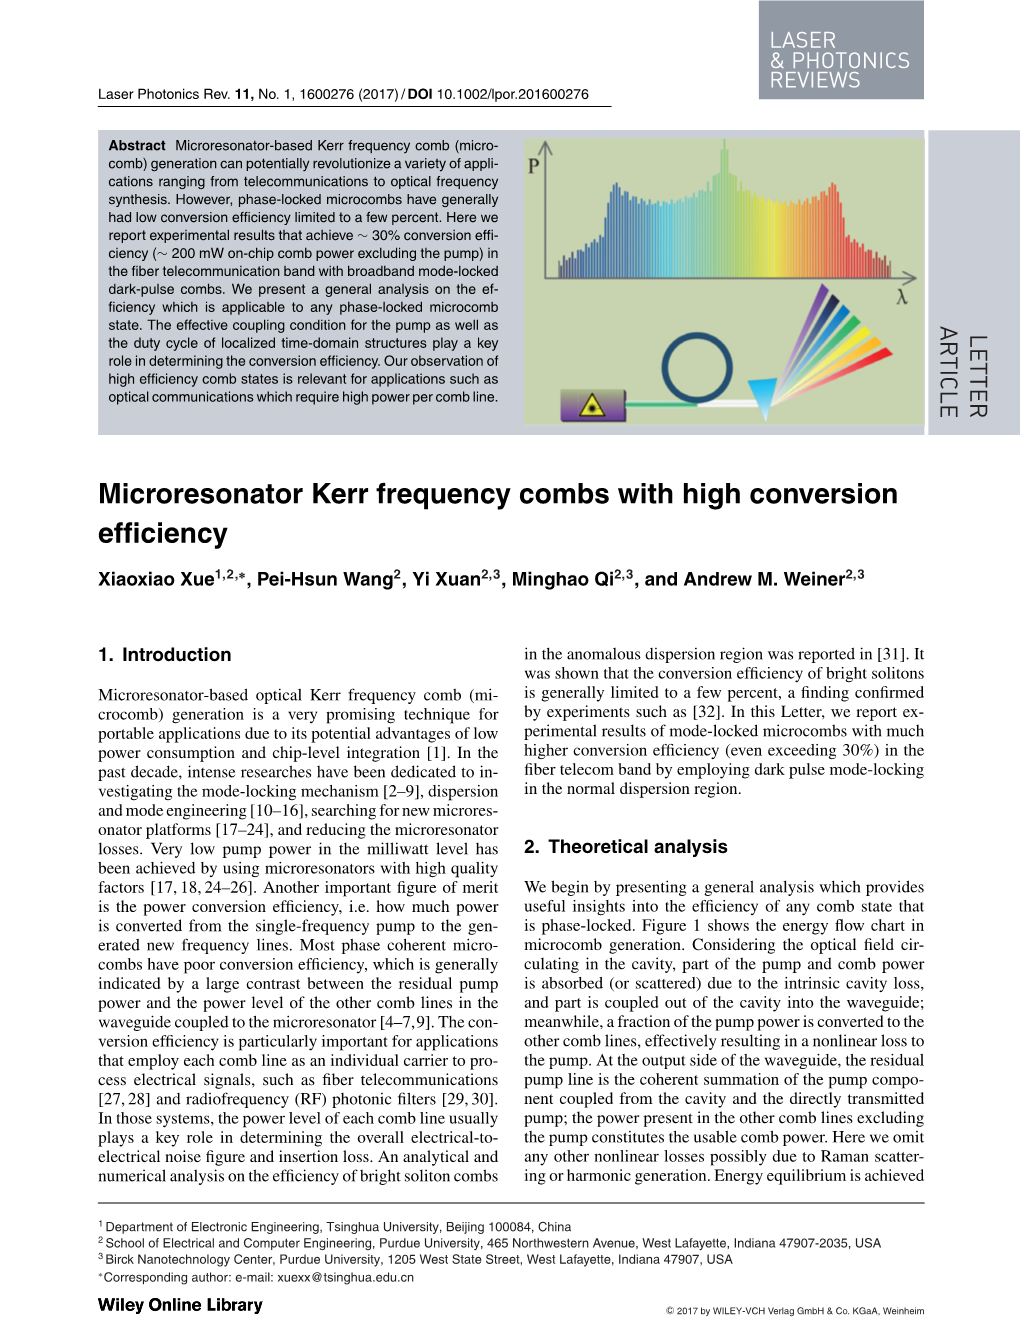 Microresonator Kerr Frequency Combs with High Conversion Efficiency